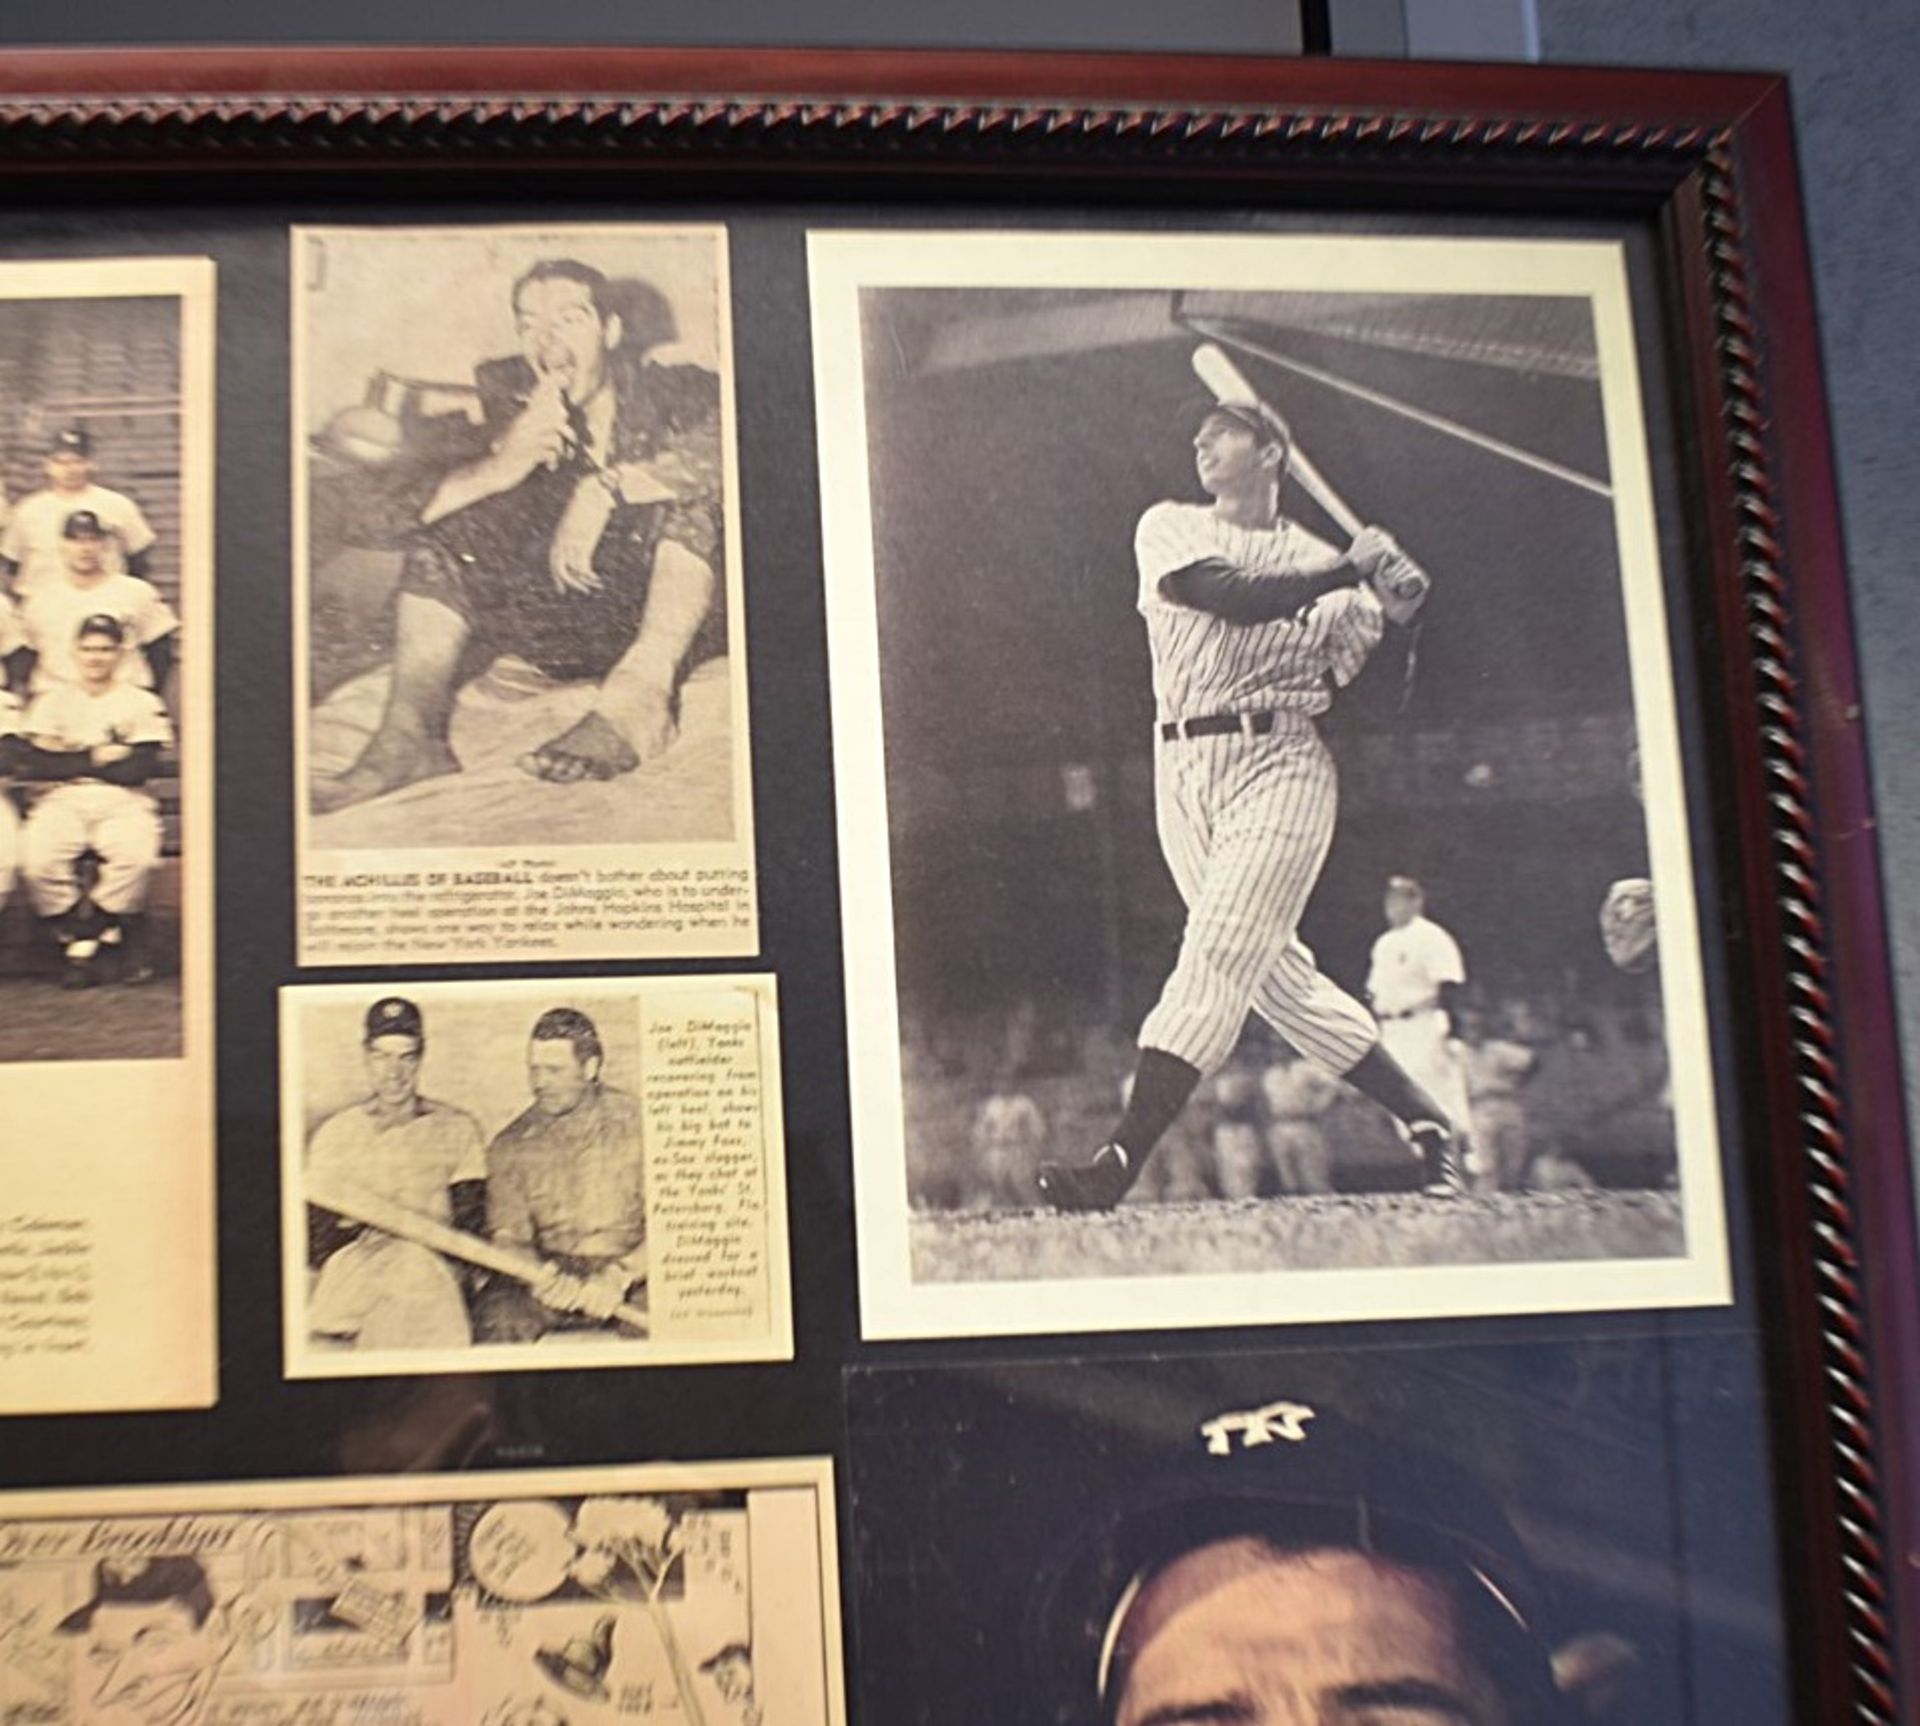 1 x Large Framed Montage Featuring American Sportsmen - From a Popular American Diner - Image 2 of 5